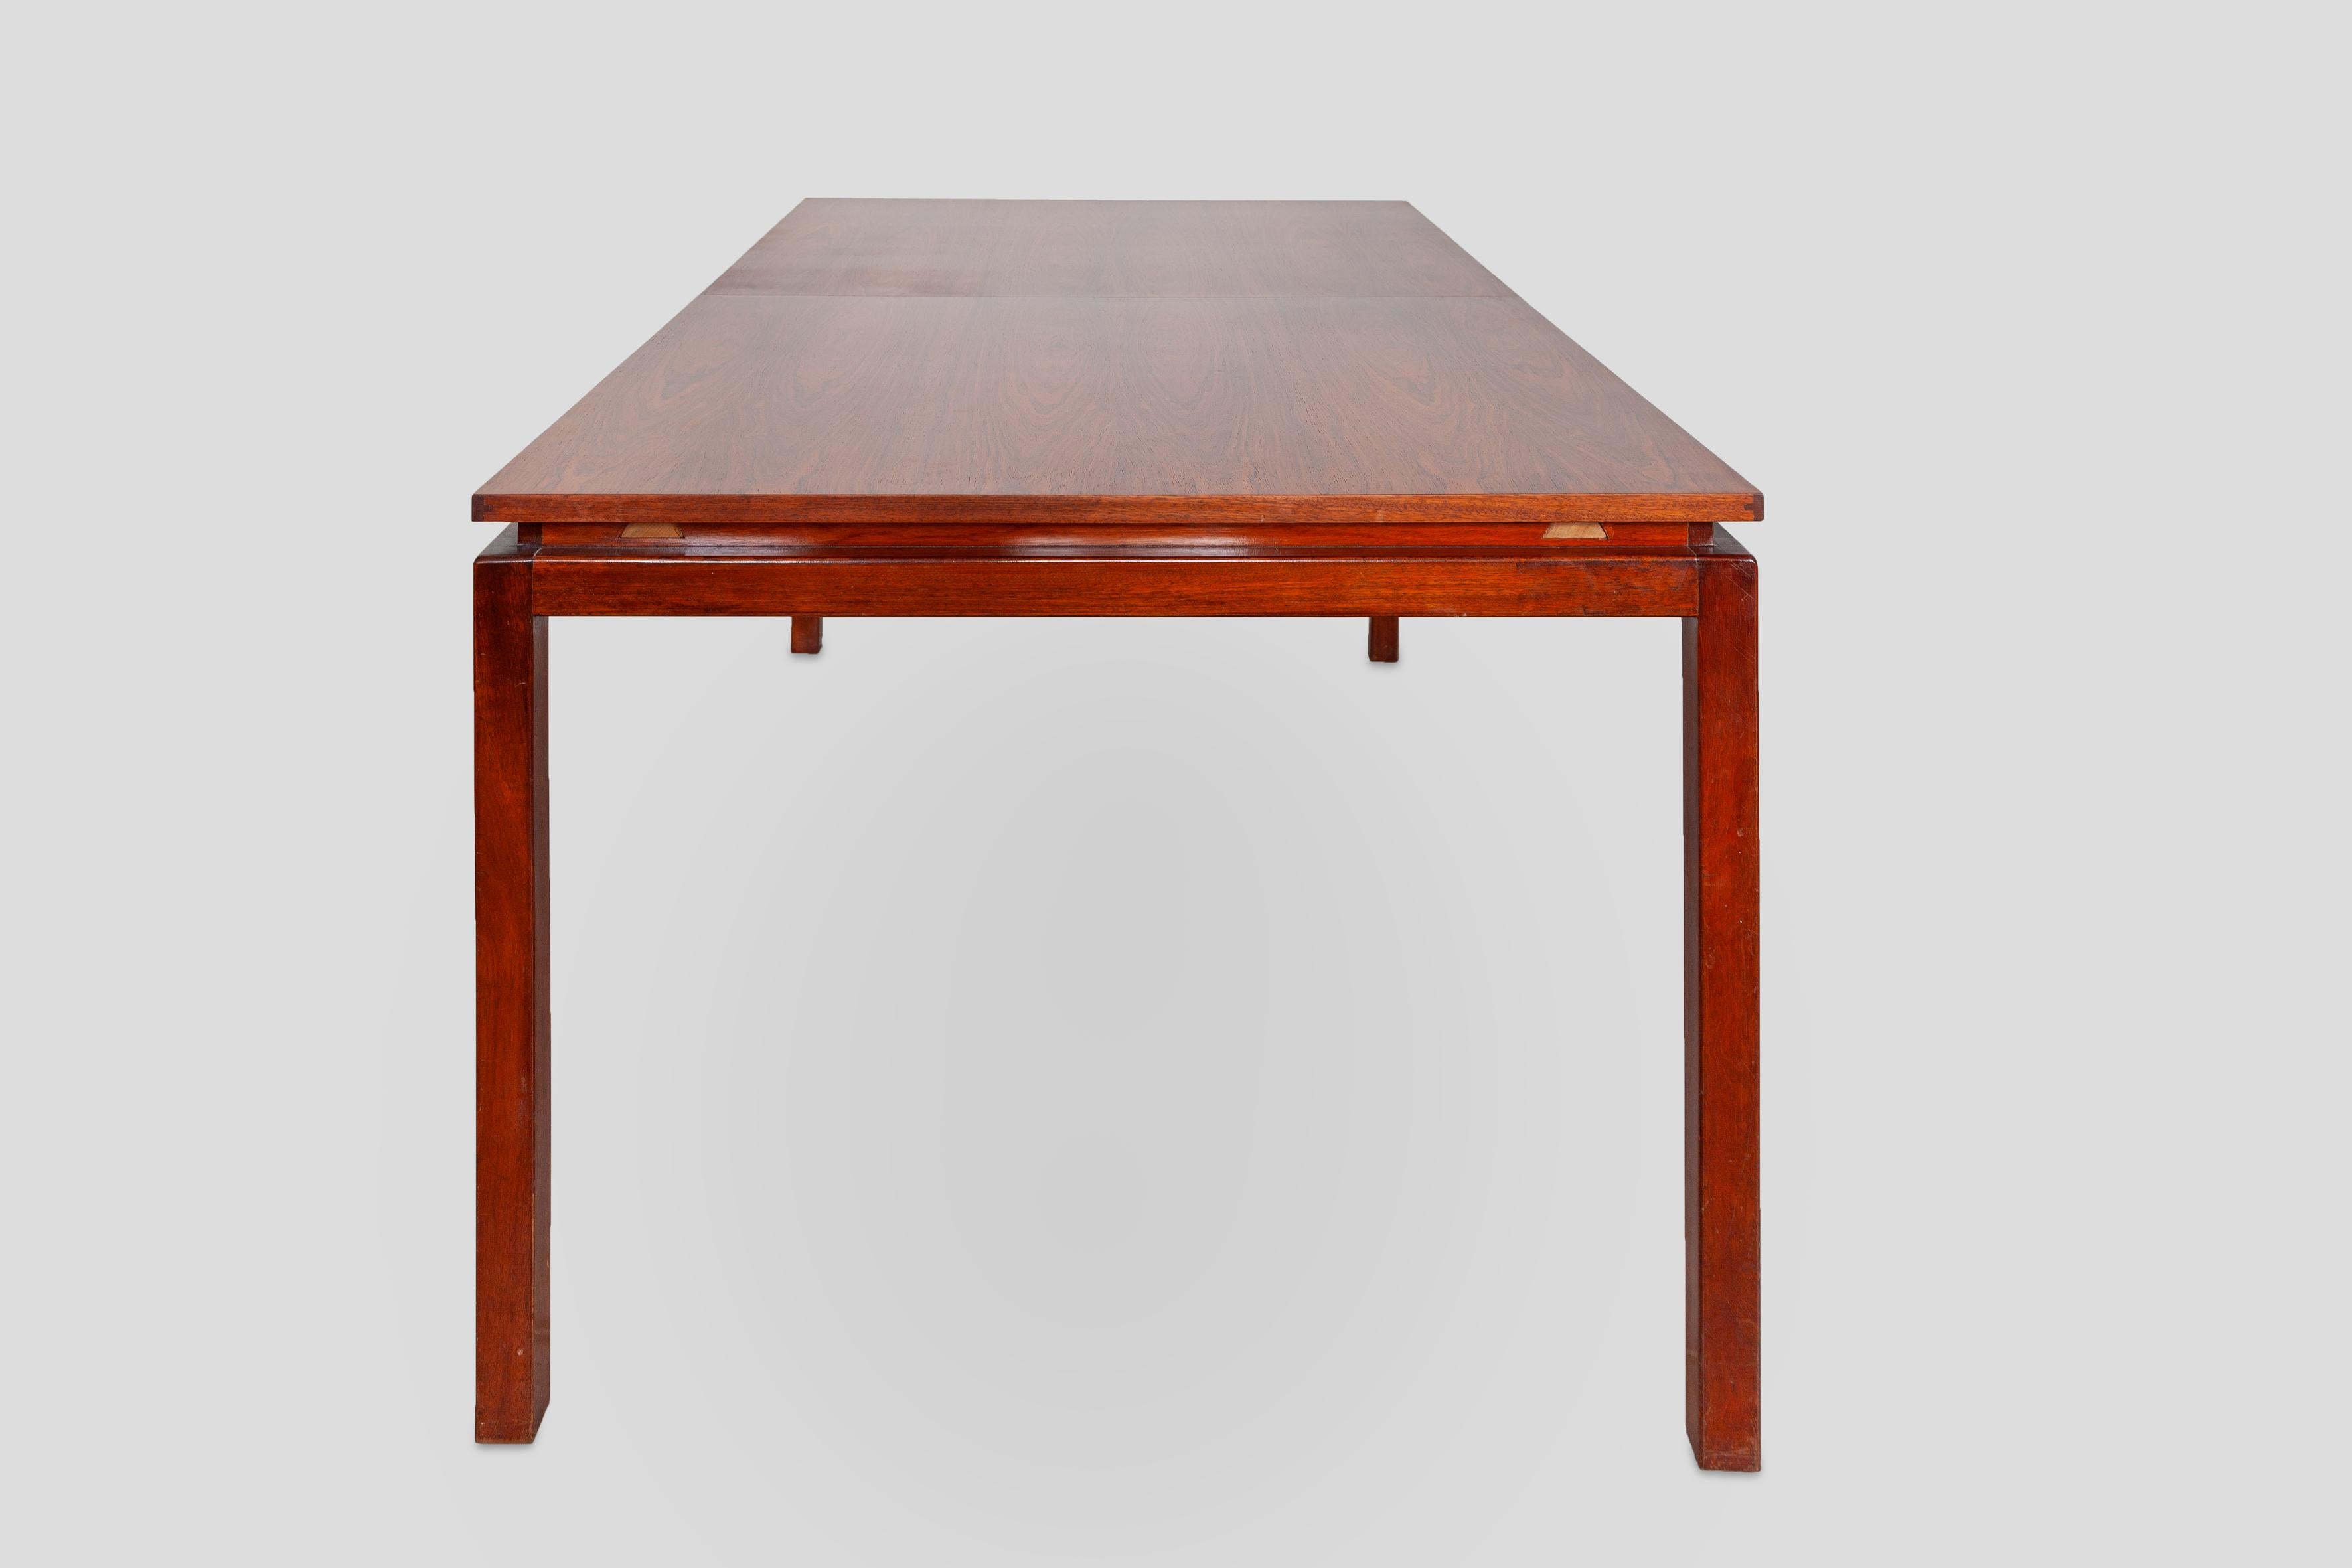 Alfred Hendrickx for Belform. A beautiful minimalist dining table with a very nice woodgrain. The table is solid sturdy and made with craftsmanship in solid wood and Zingana veneer.! The table is extendable in the middle with a leave of 60cm width.